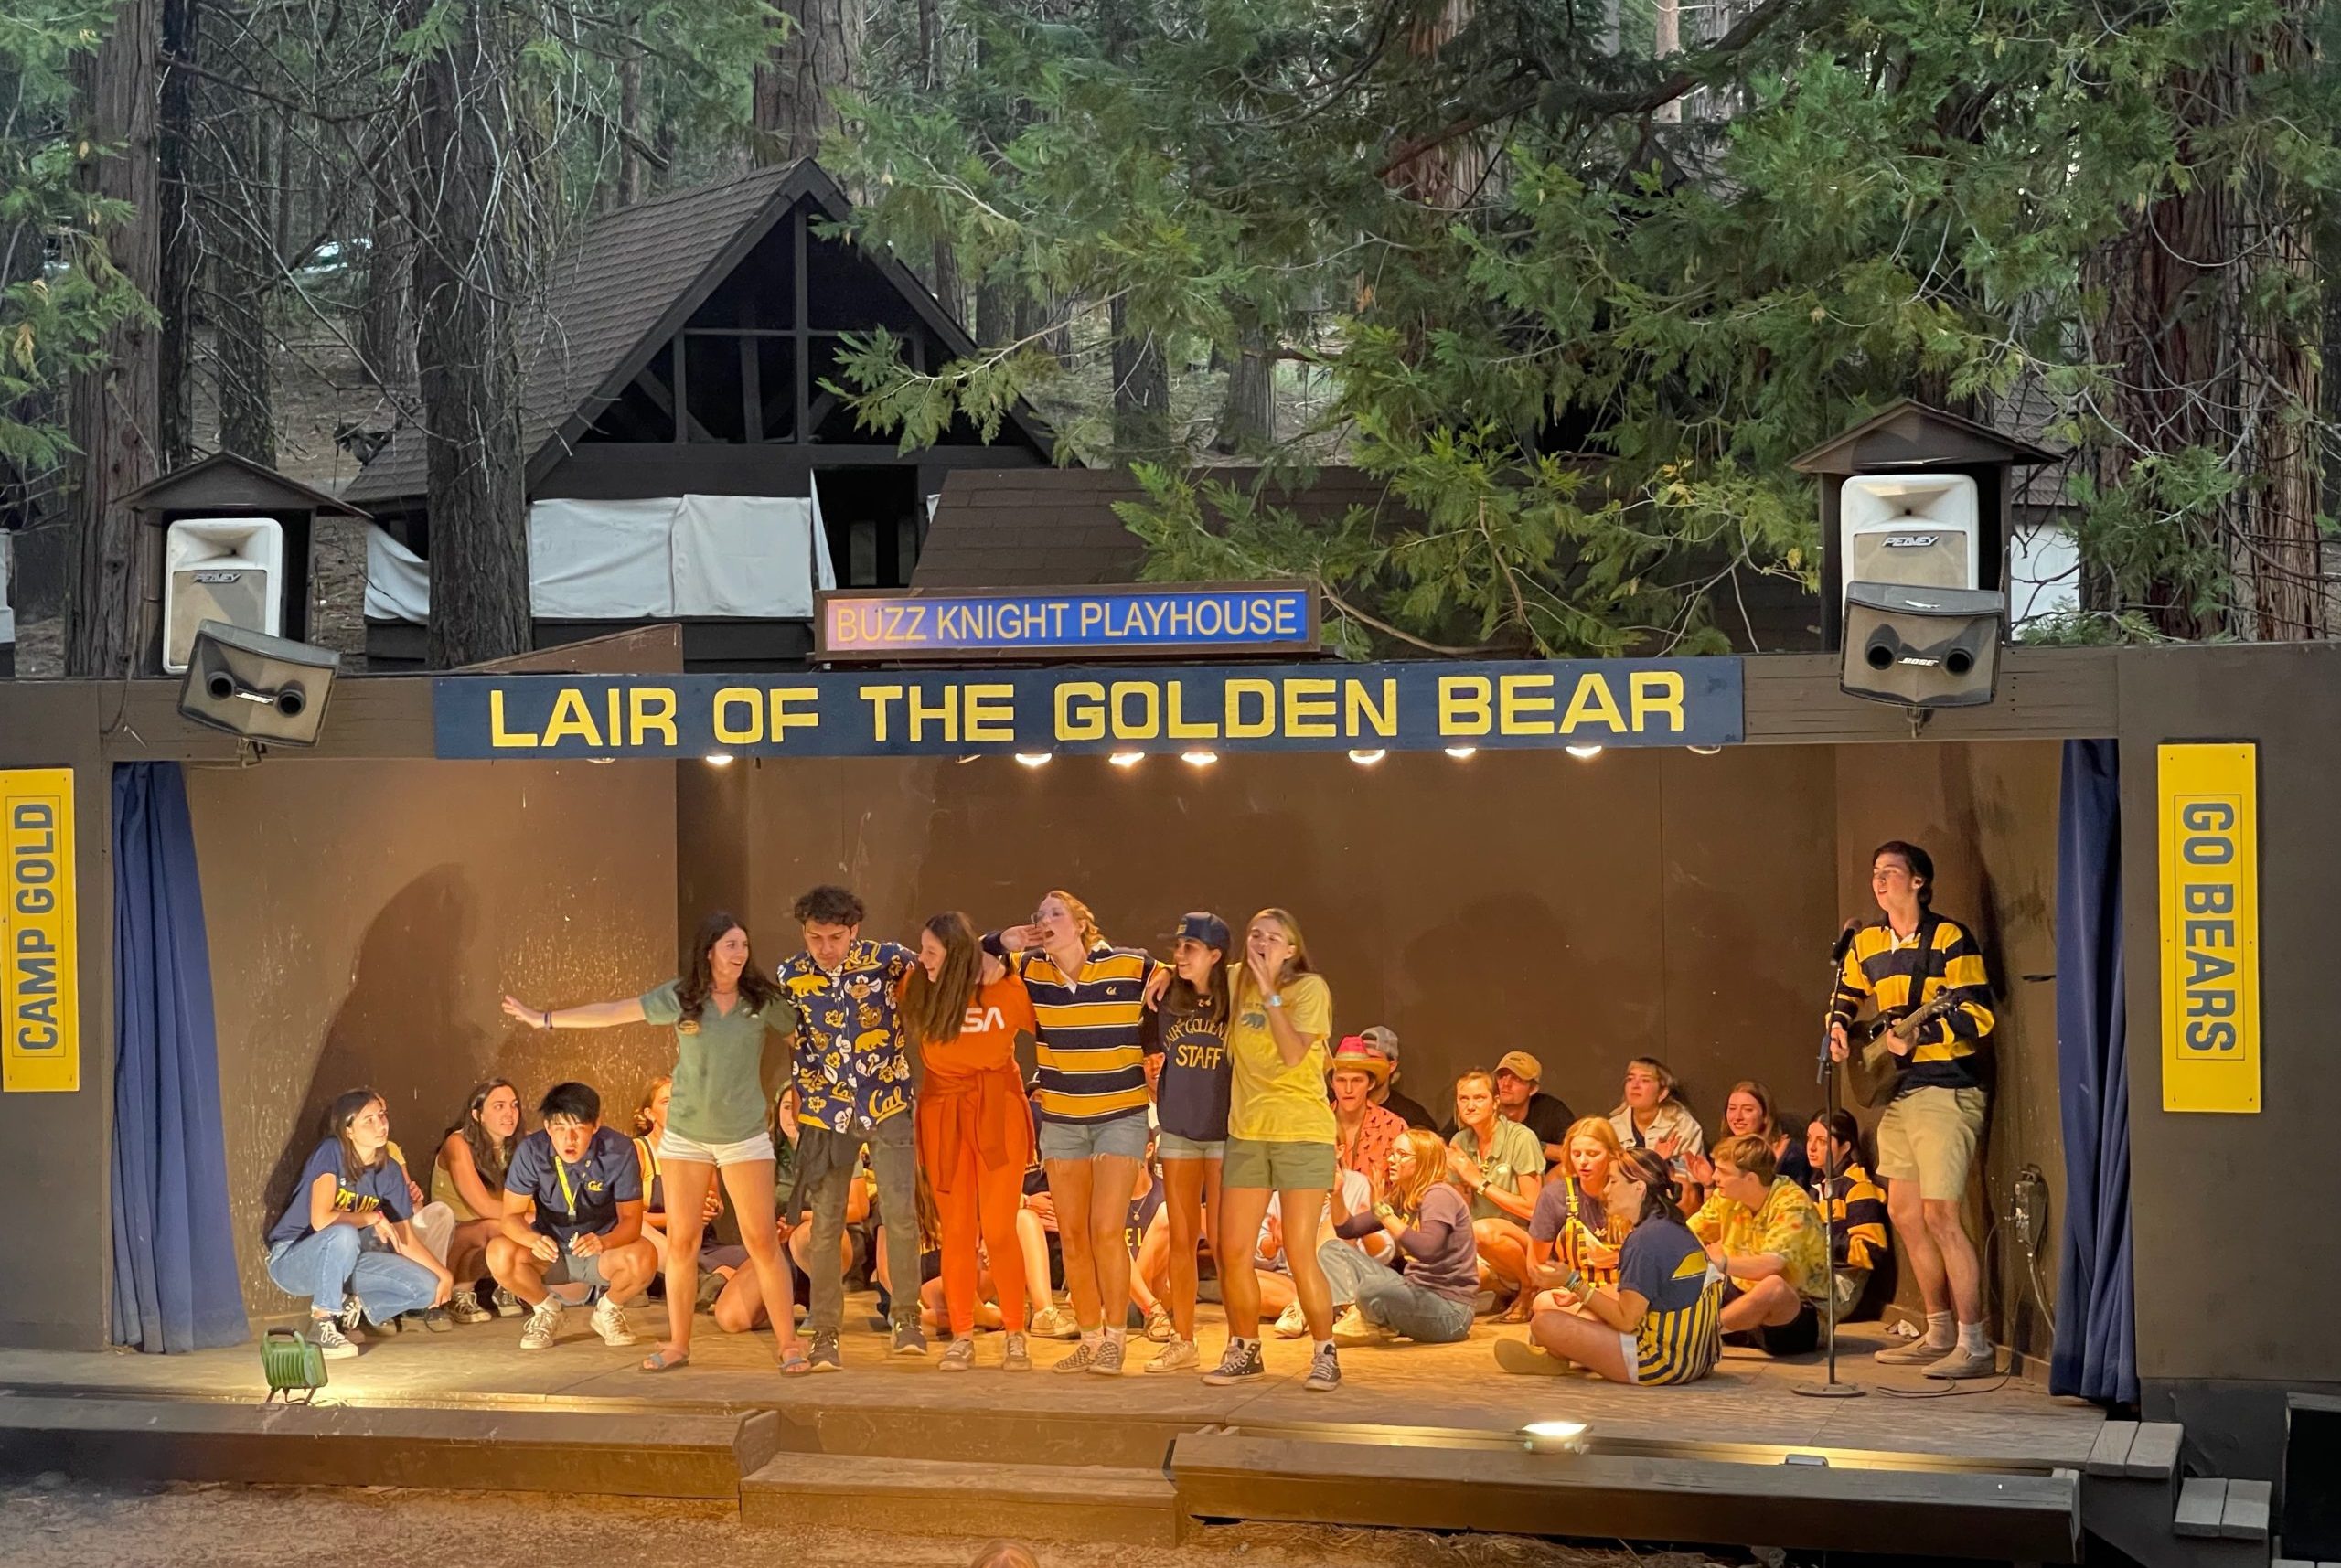 Lair staffers, dressed in blue and gold, singing on stage during the Saturday night show. One staffer is playing the guitar and 5 are singing.